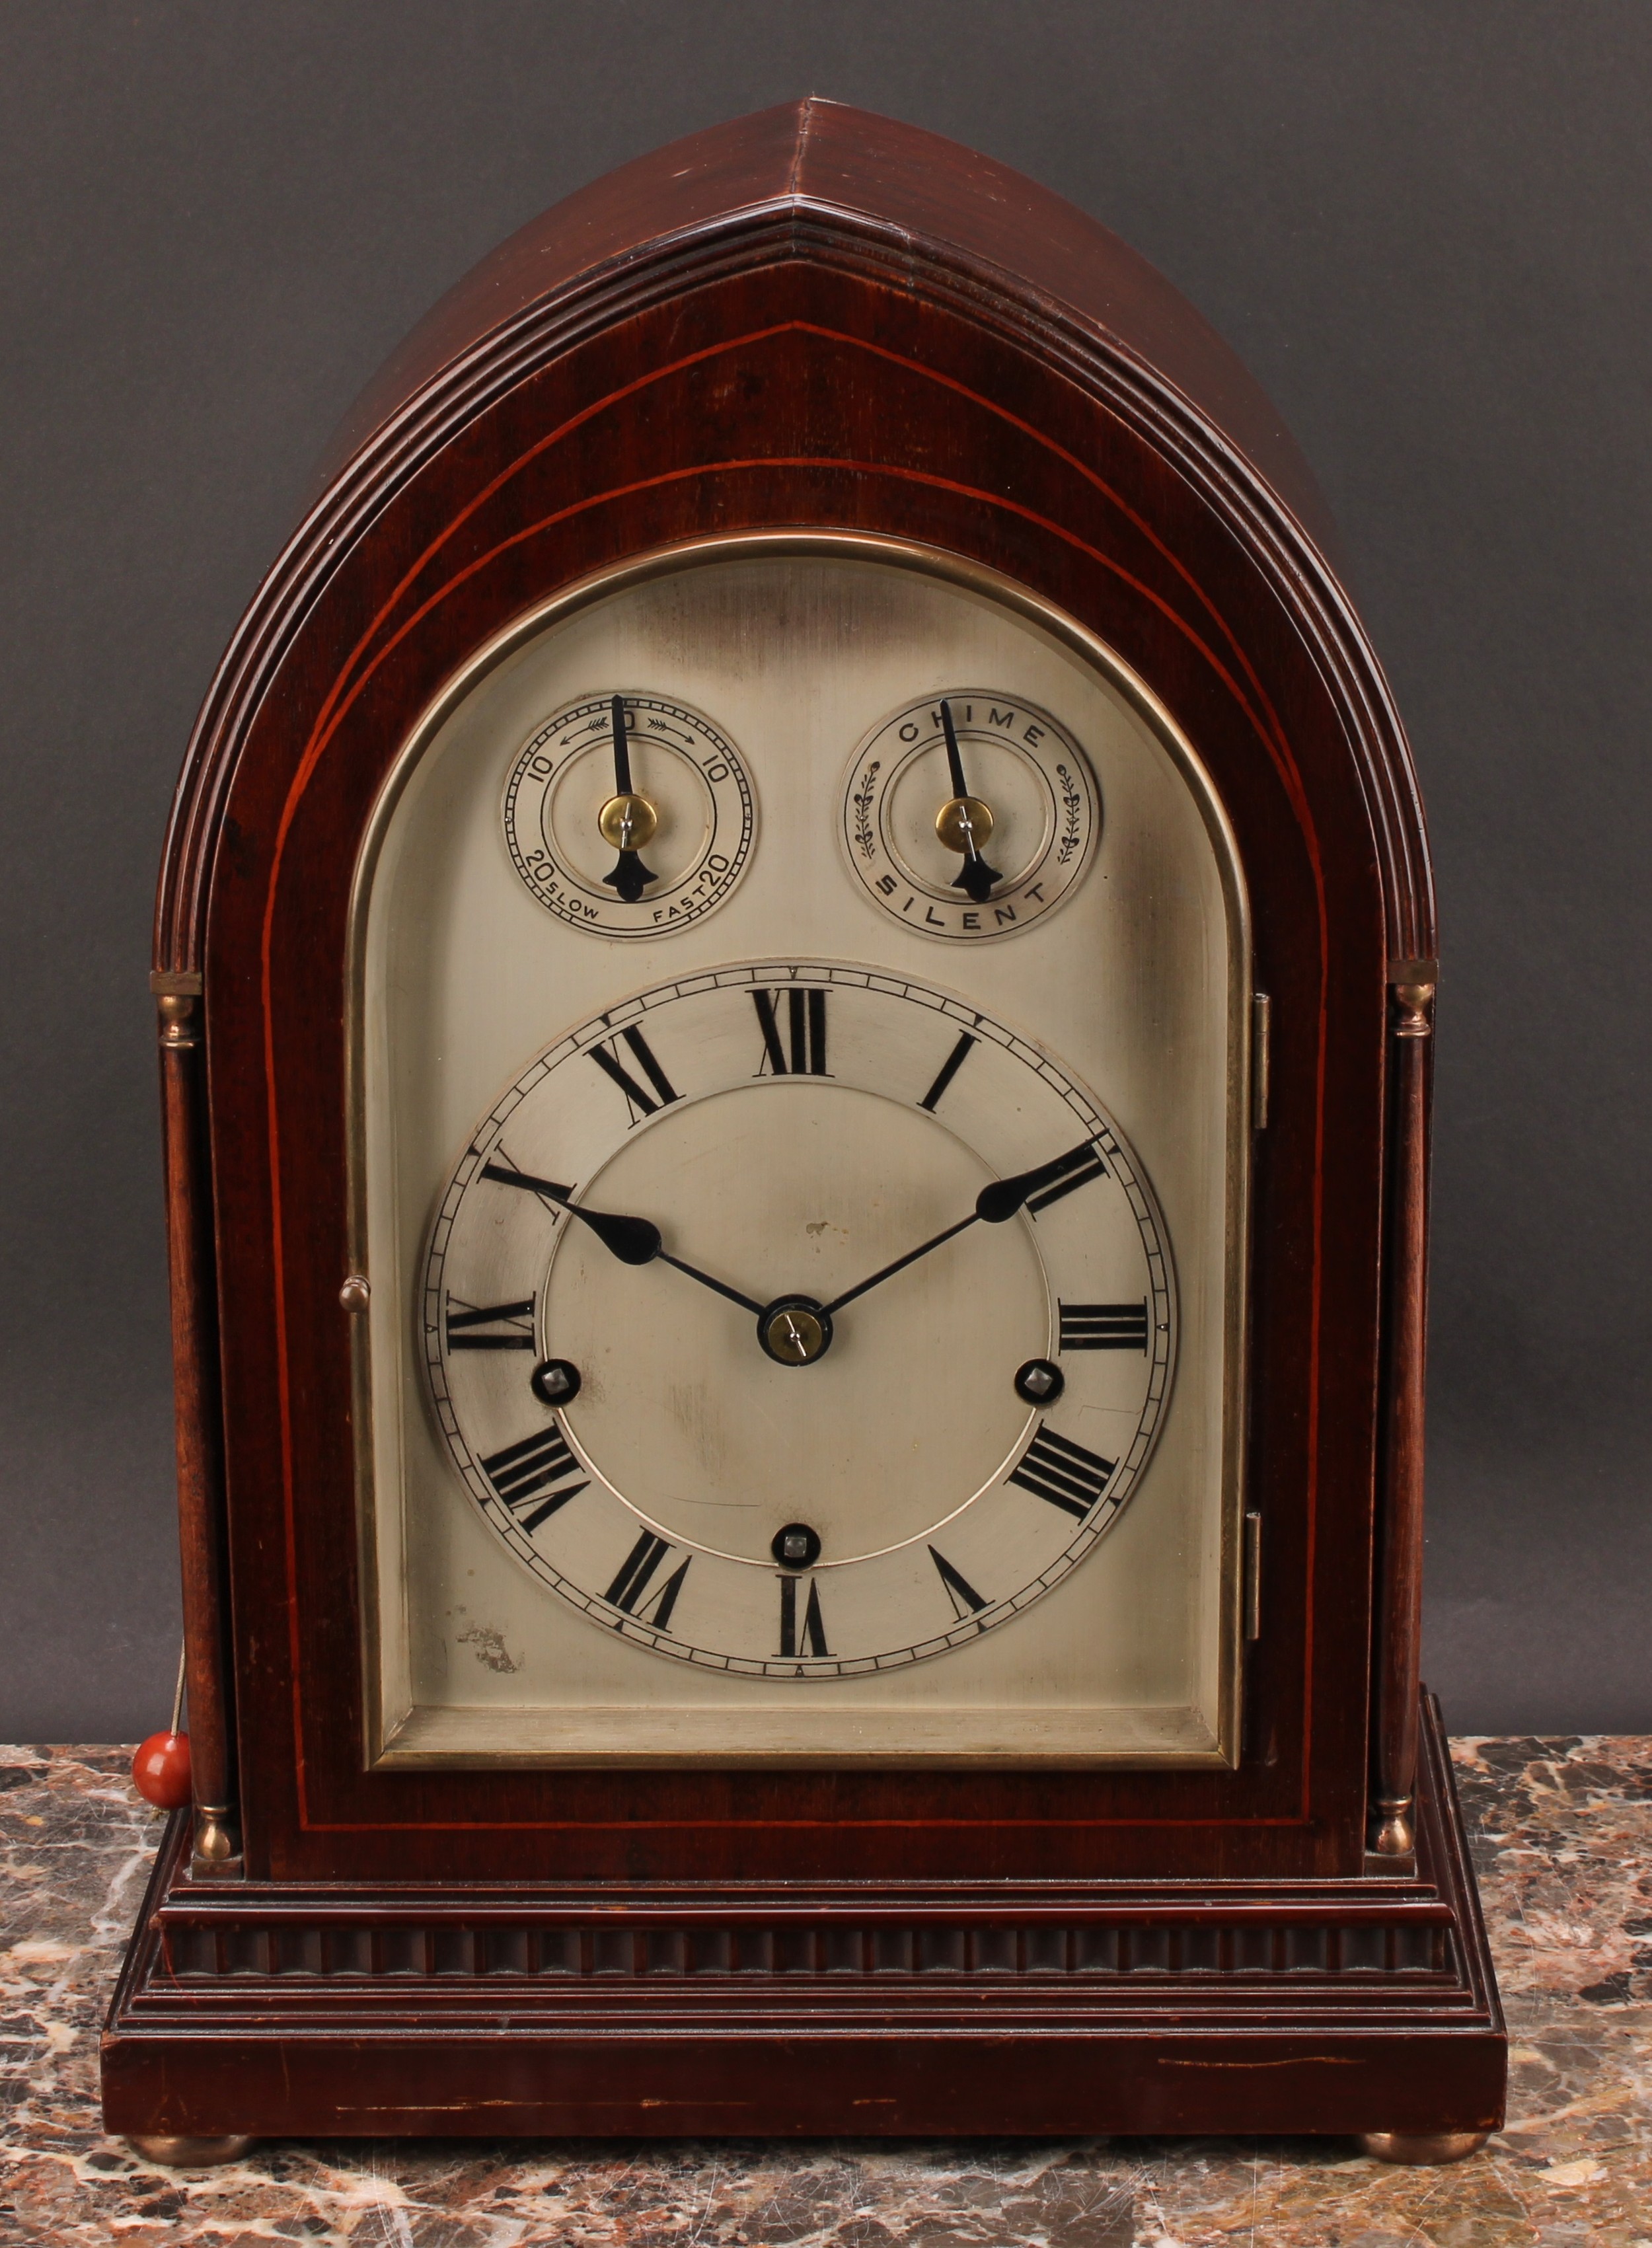 An early 20th century mahogany lancet bracket clock, 14.5cm arched silvered dial with Roman